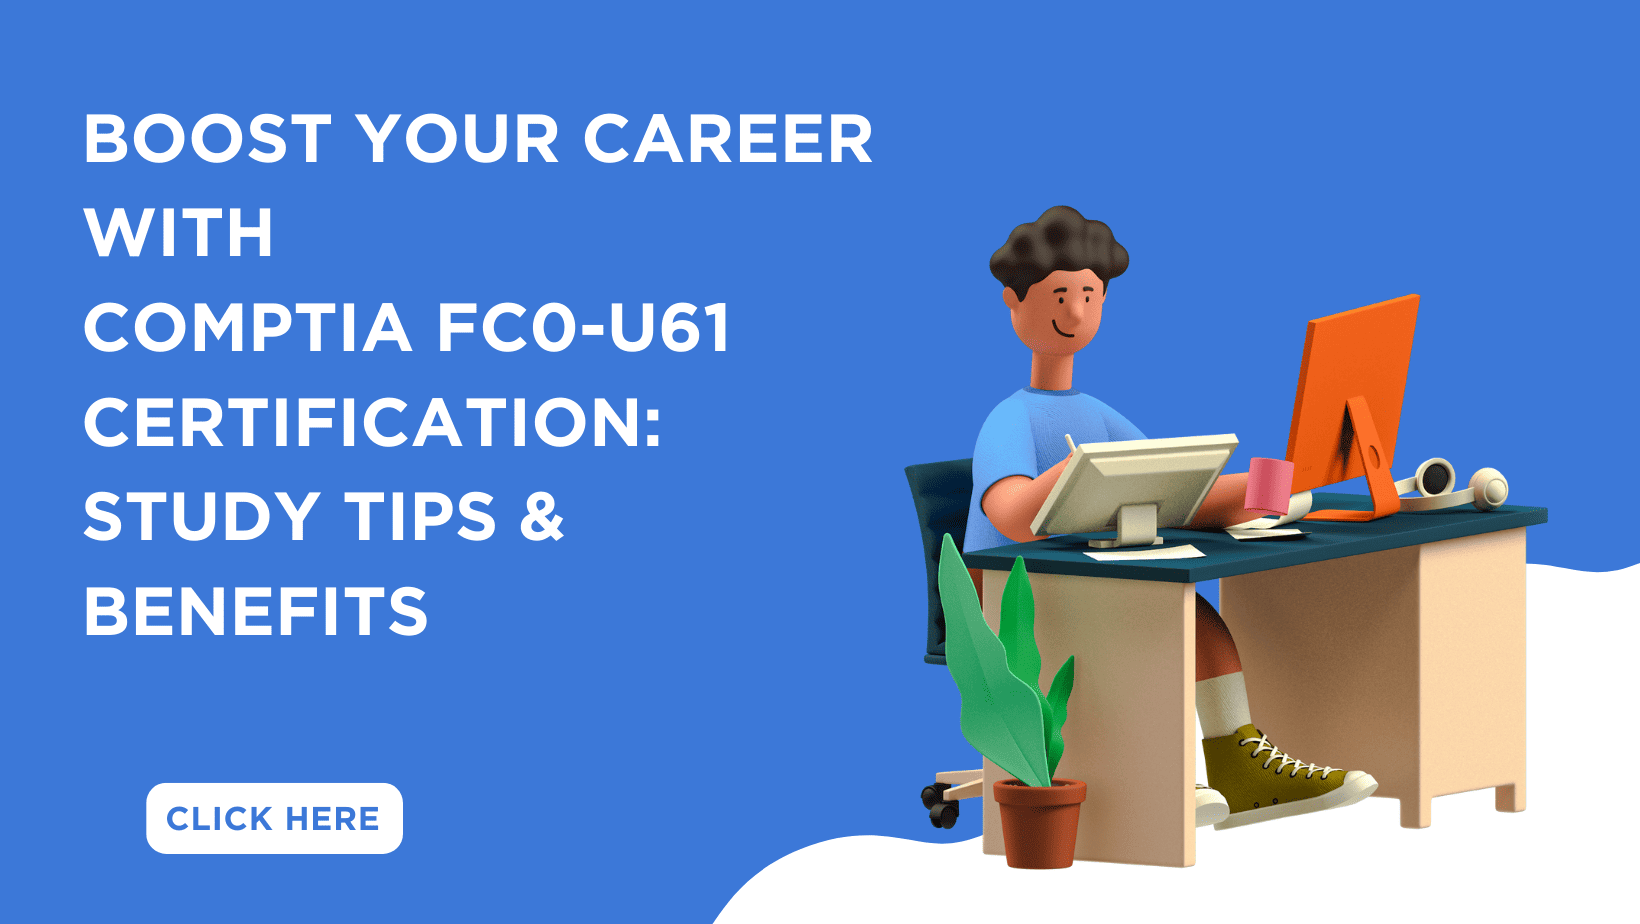 Enhance your CompTIA FC0-U61 ITF+ exam preparation with expert study tips and practice tests for a successful certification journey.